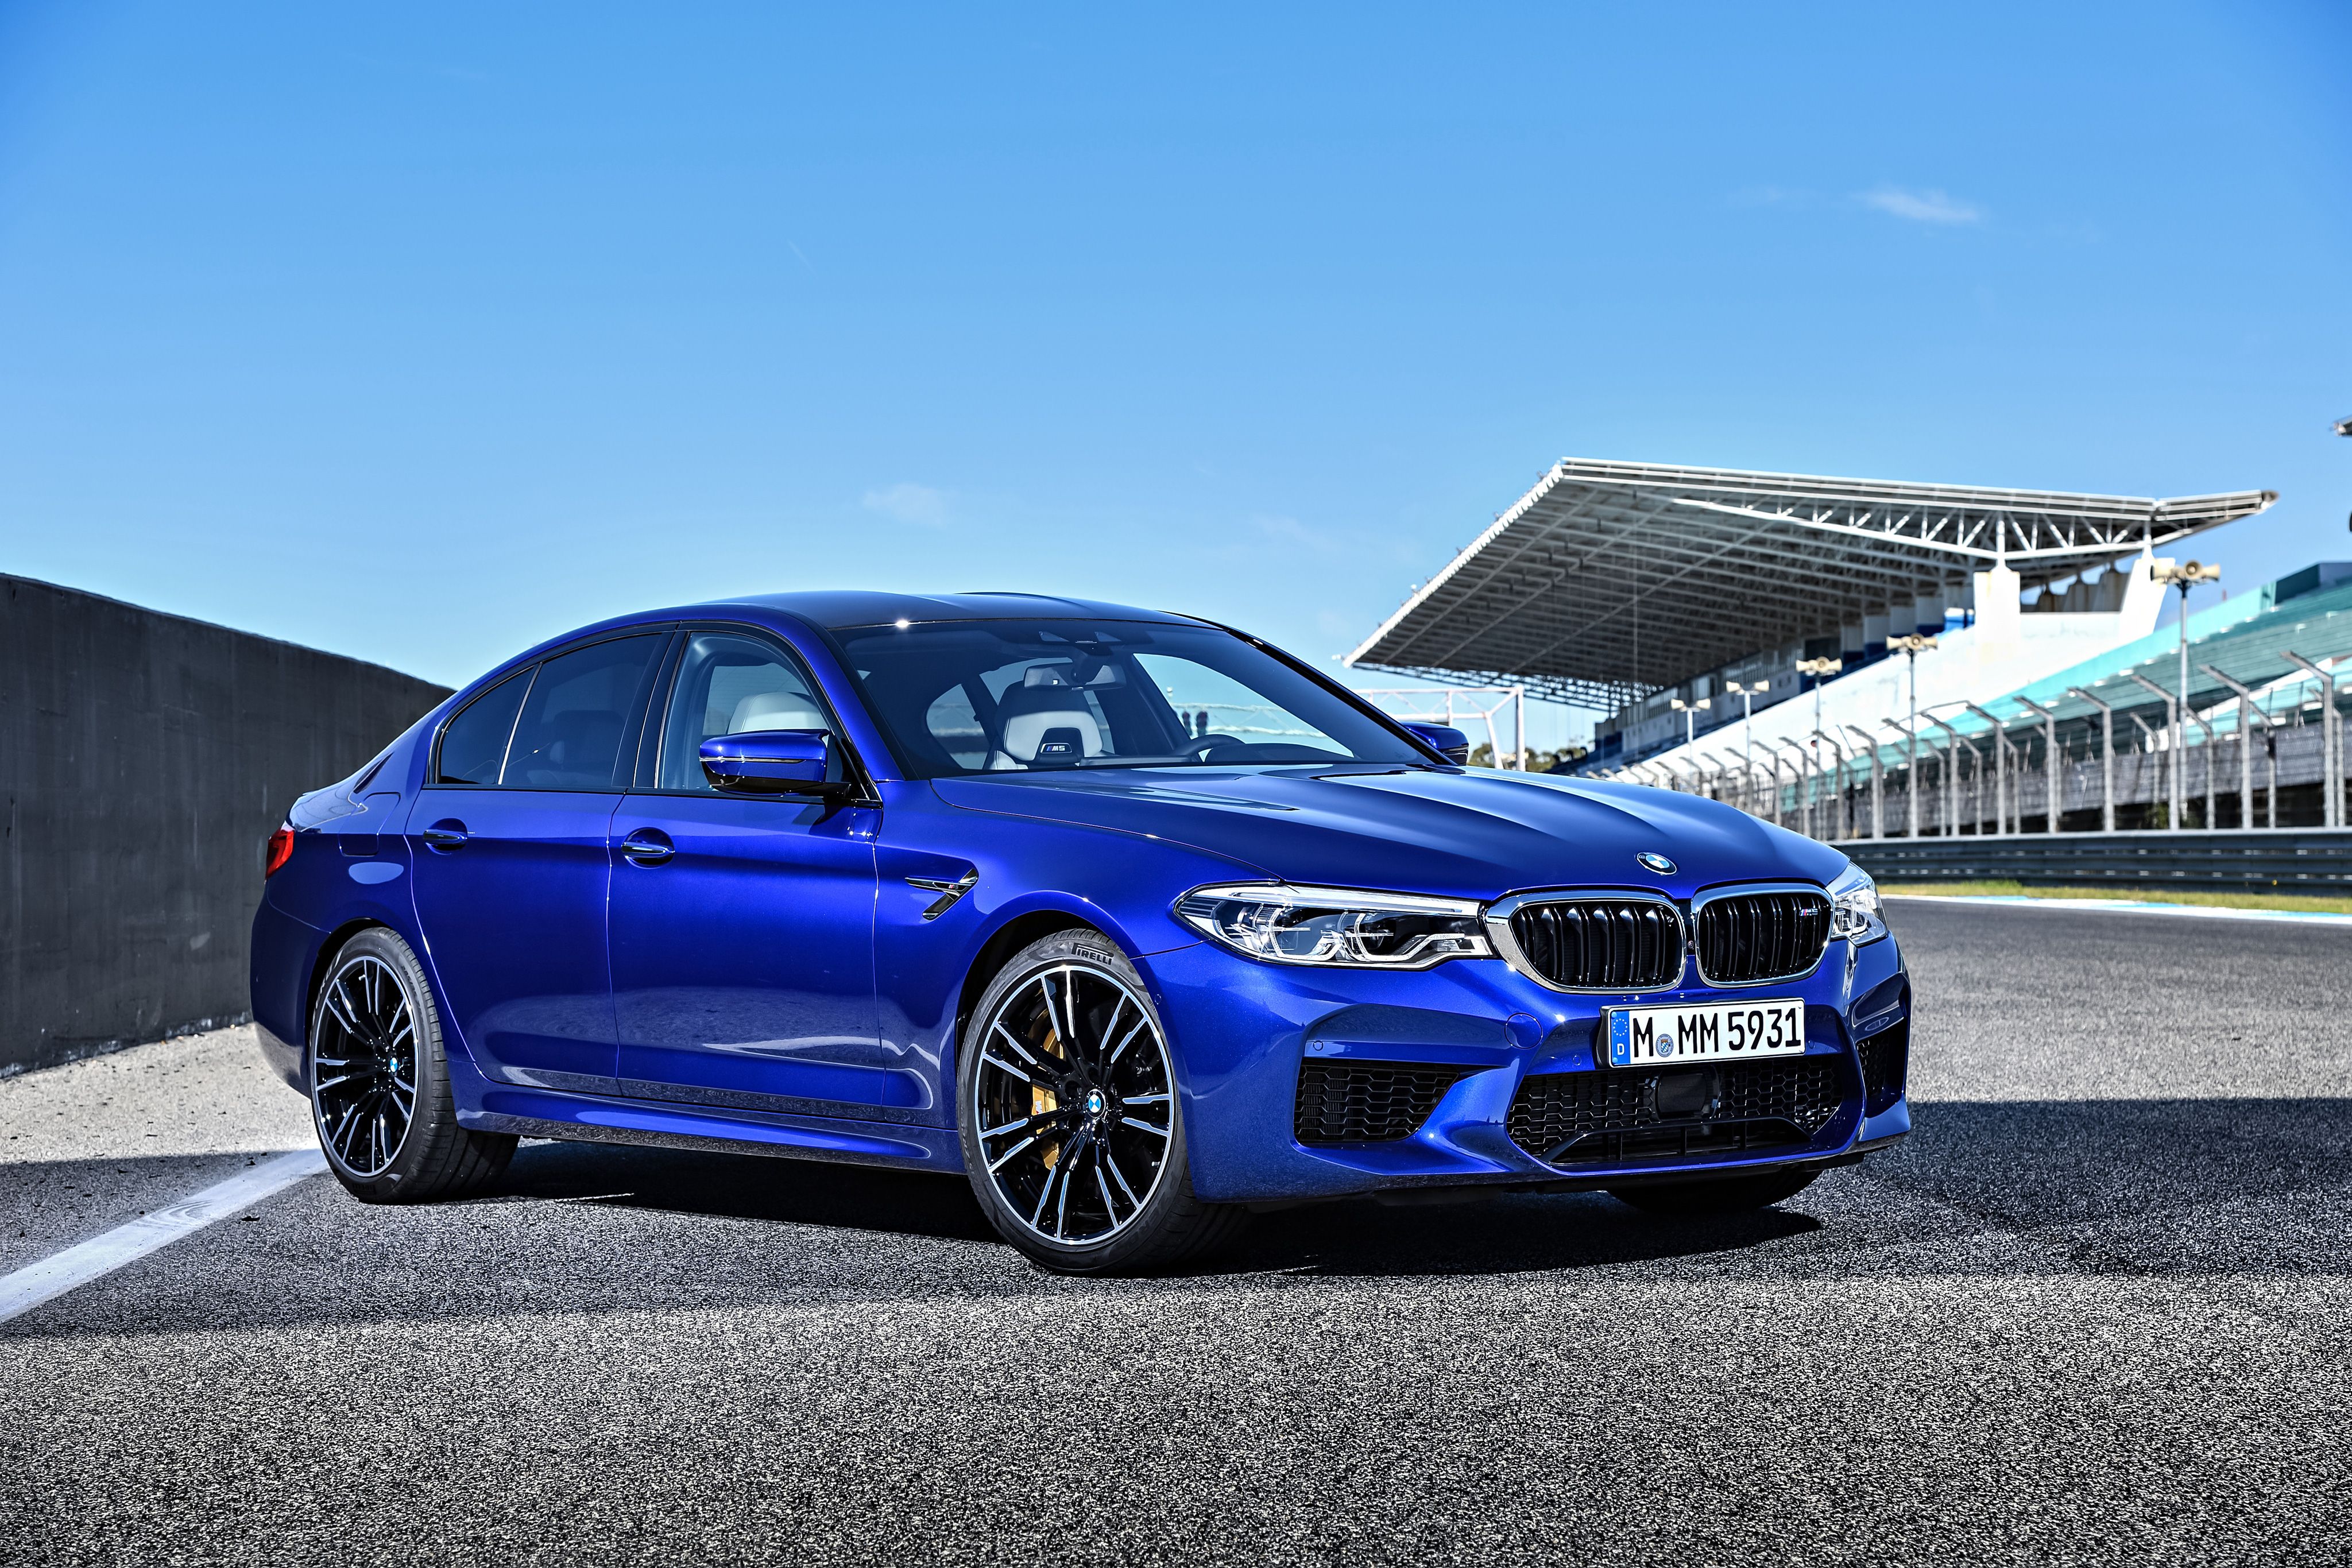 4096x2731 Bmw M5 4k Hd Cars 4k Wallpaper Image Background Photo And Picture